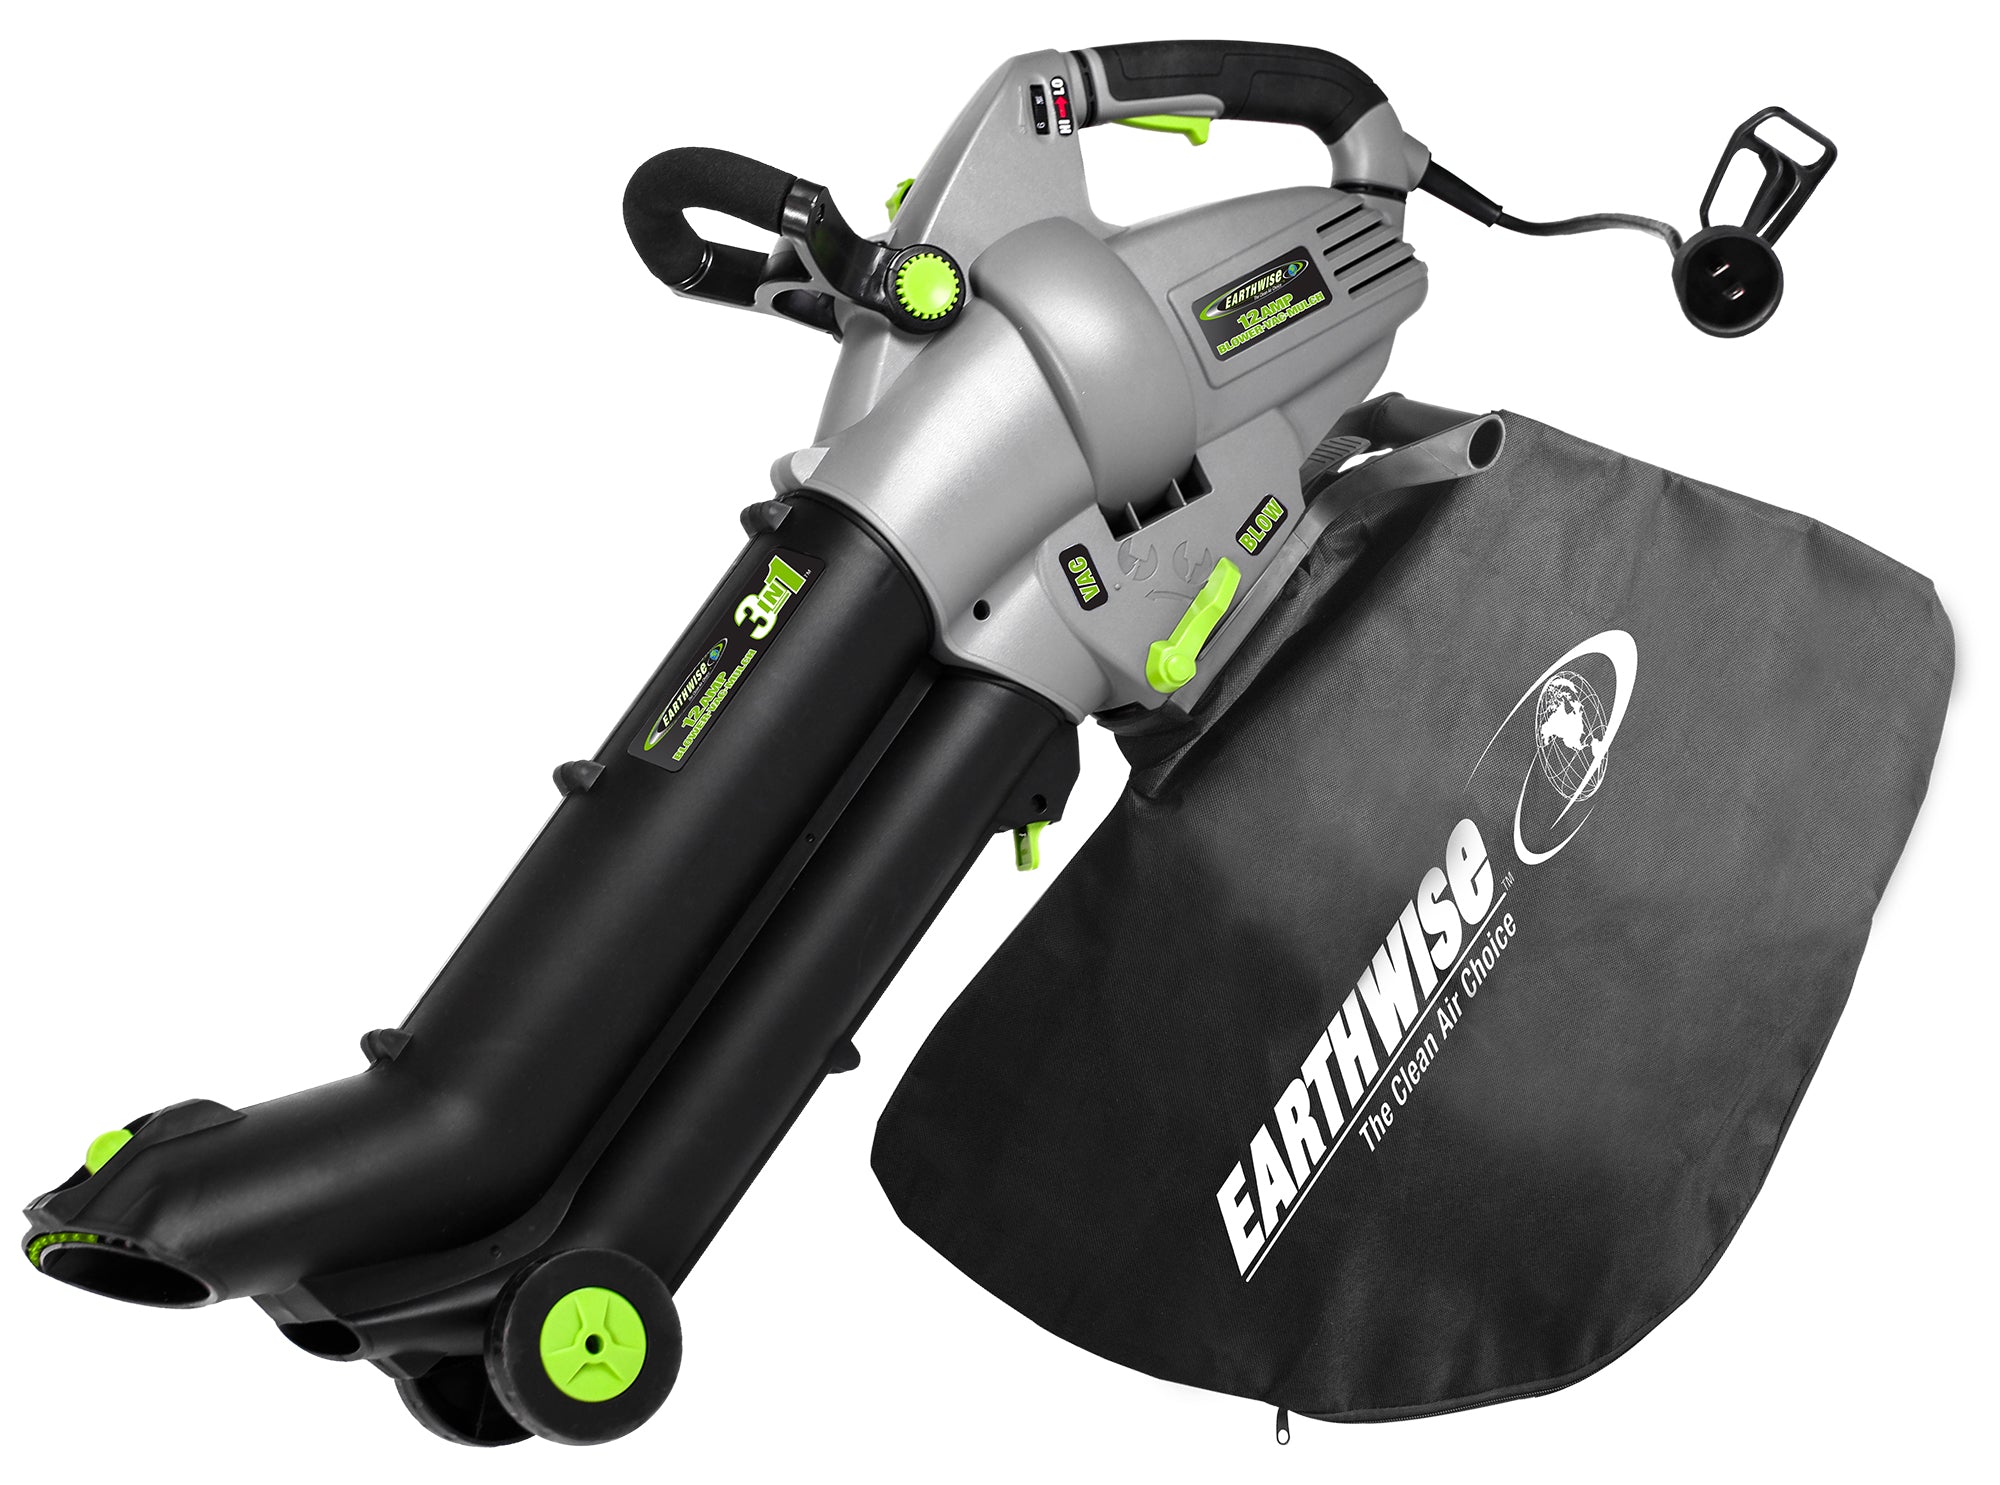 Earthwise Power Tools by ALM 12-Amp 120V Corded 3 in 1 Blower